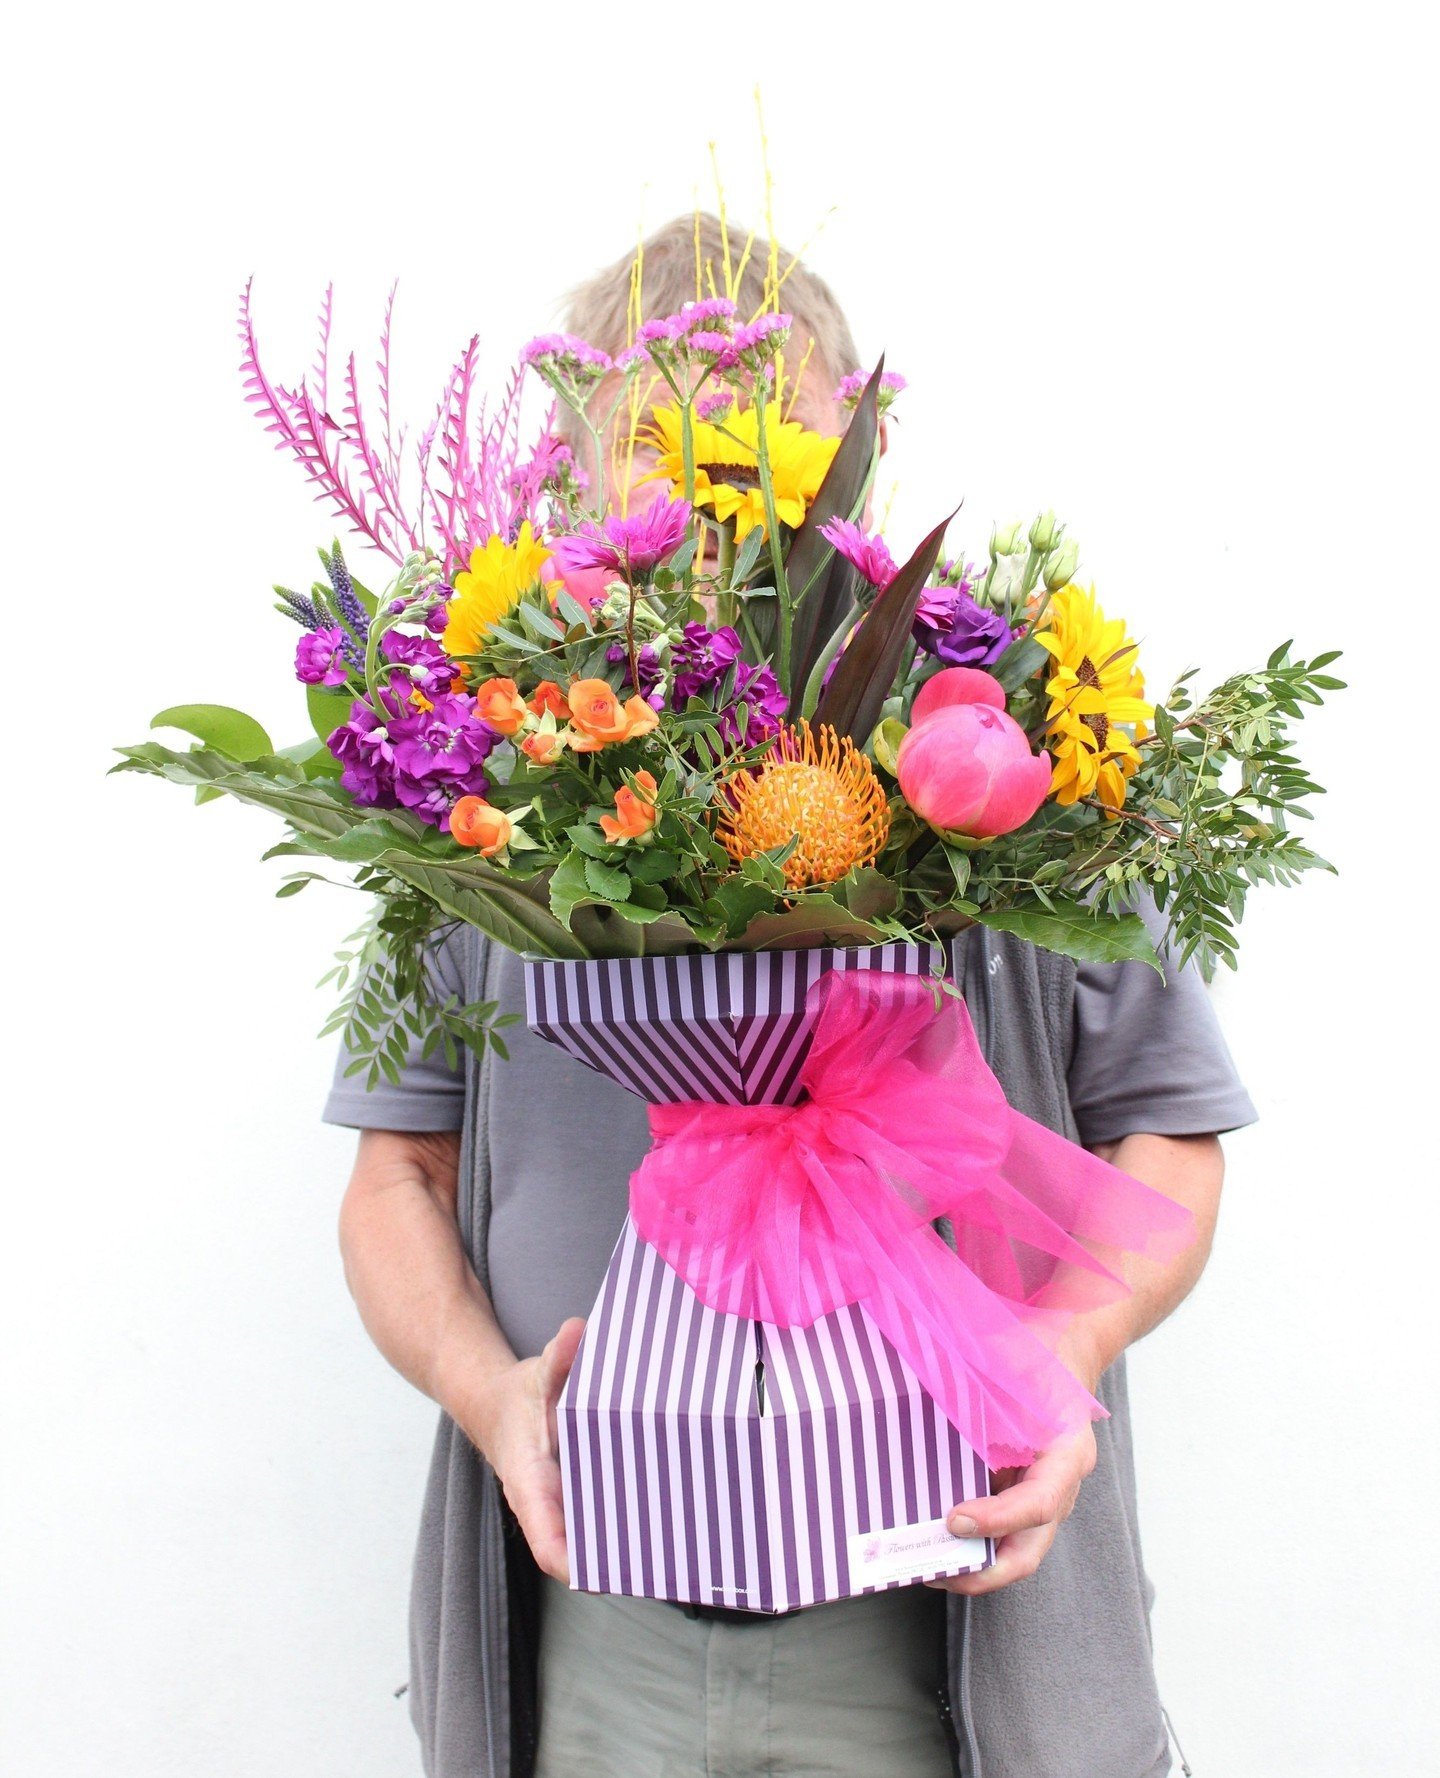 Somewhere behind this beauty of a bouquet there is a flowerboy!!⁠
⁠
#goosnarghflowershop #wowfactor #flowerboy #flowerswithpassion